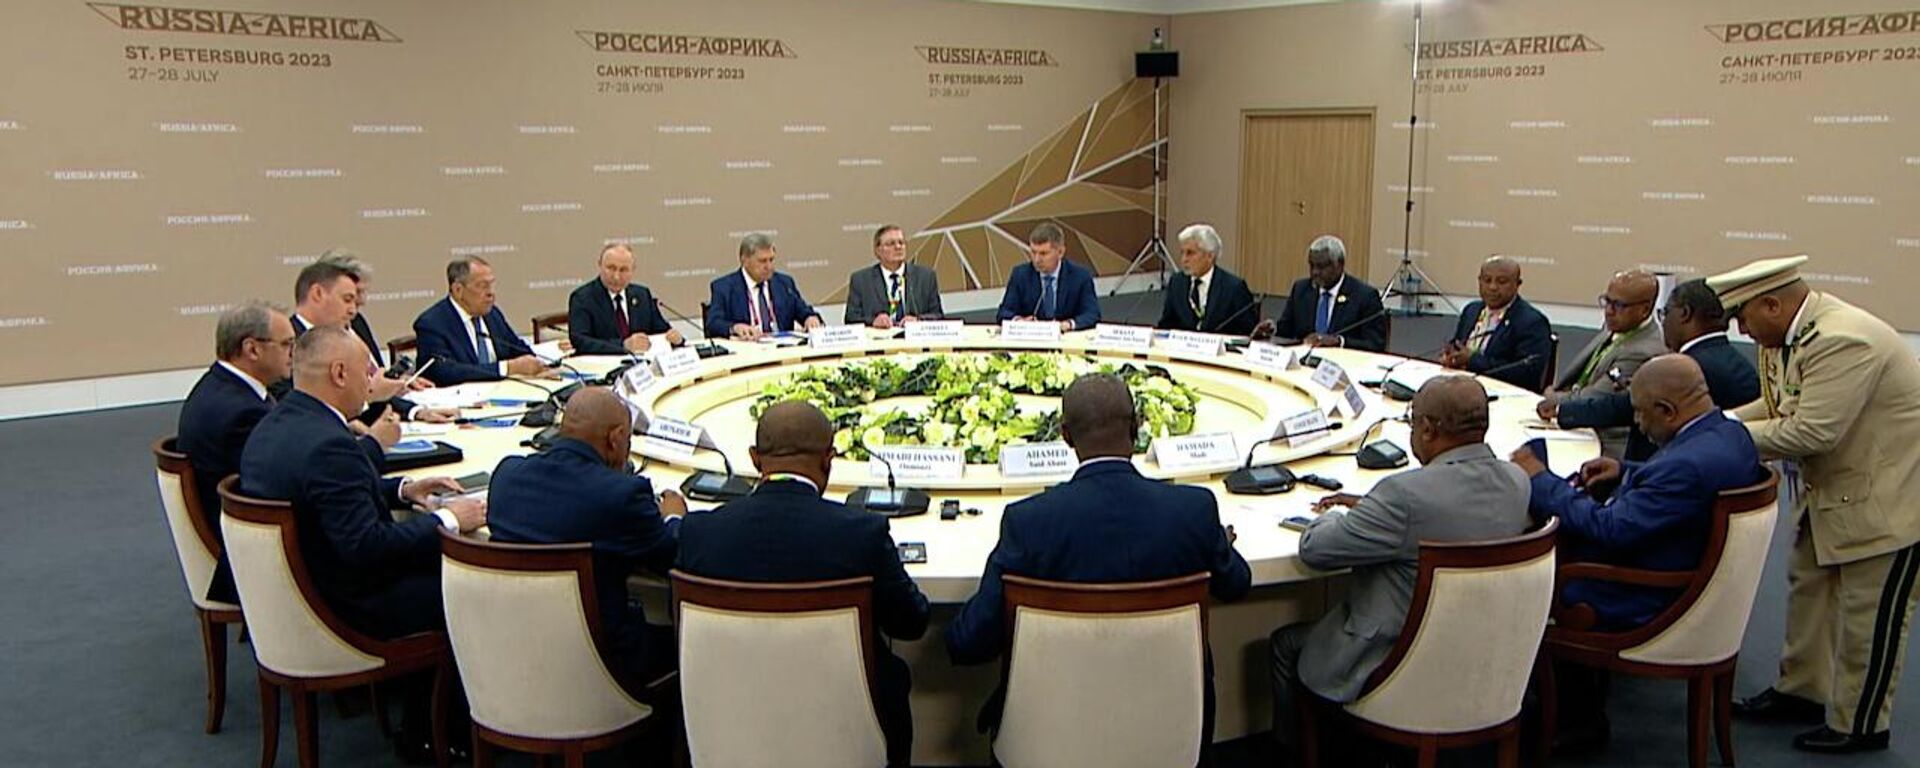 Vladimir Putin holds a trilateral meeting with the Chairman of the African Union, the President of the Union of the Comoros, Azali Assoumani, and the Chairman of the African Union Commission, Moussa Faki Mahamat. - Sputnik Africa, 1920, 27.07.2023